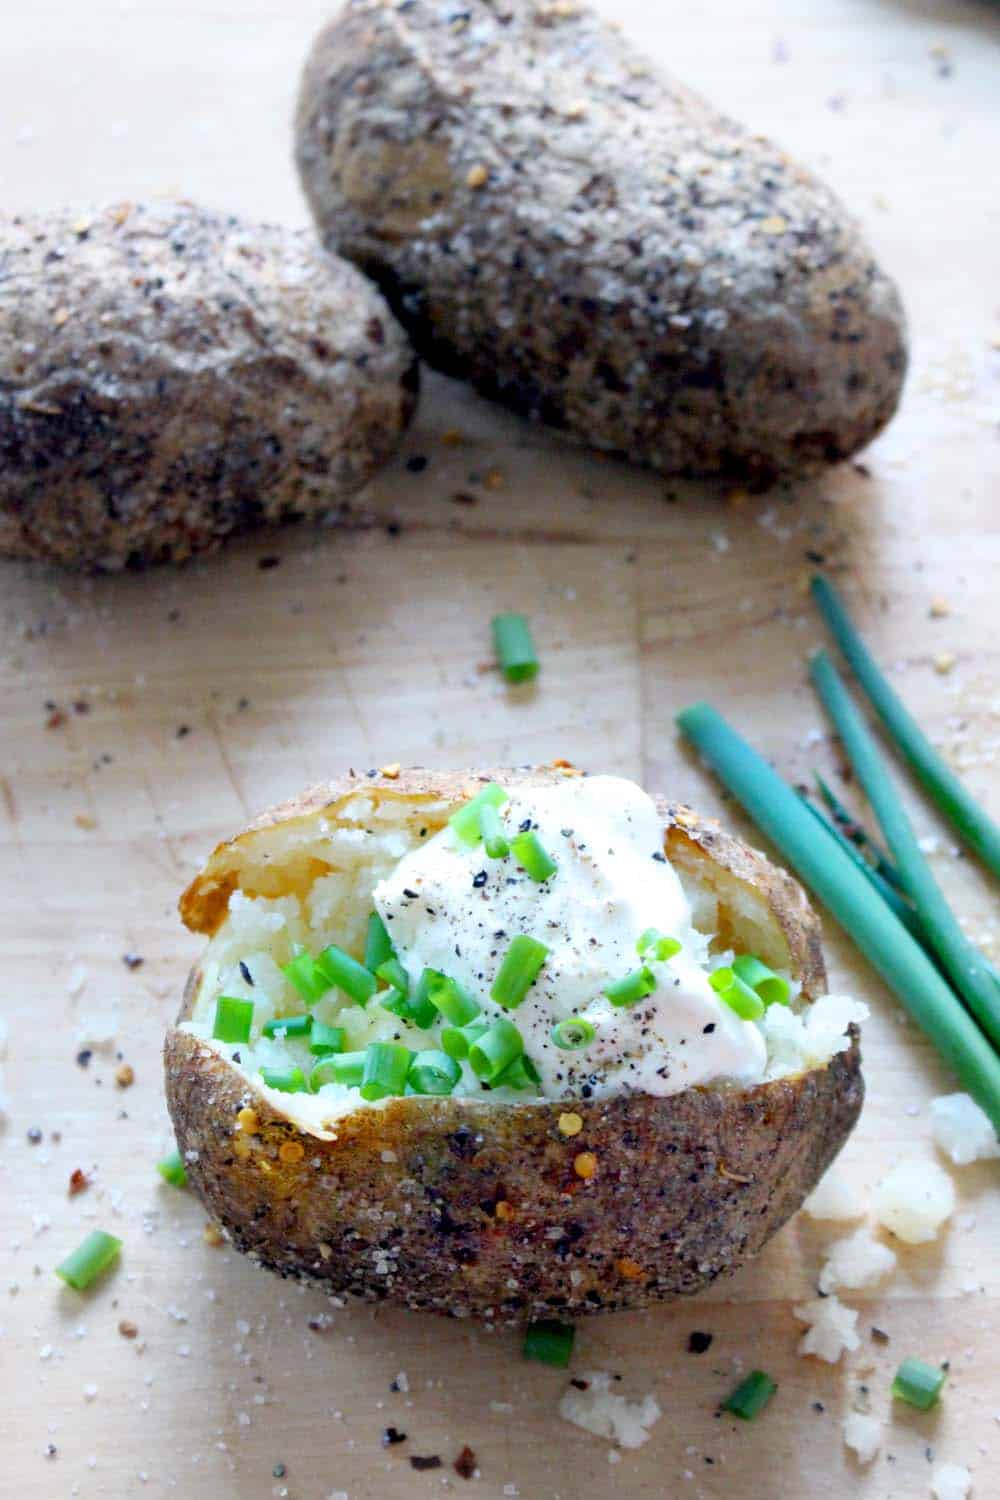 Baked potato sliced down the middle and topped with sour cream, pepper, and sliced green onions. Whole baked potatoes are in the background and whole scallions are displayed on the side.